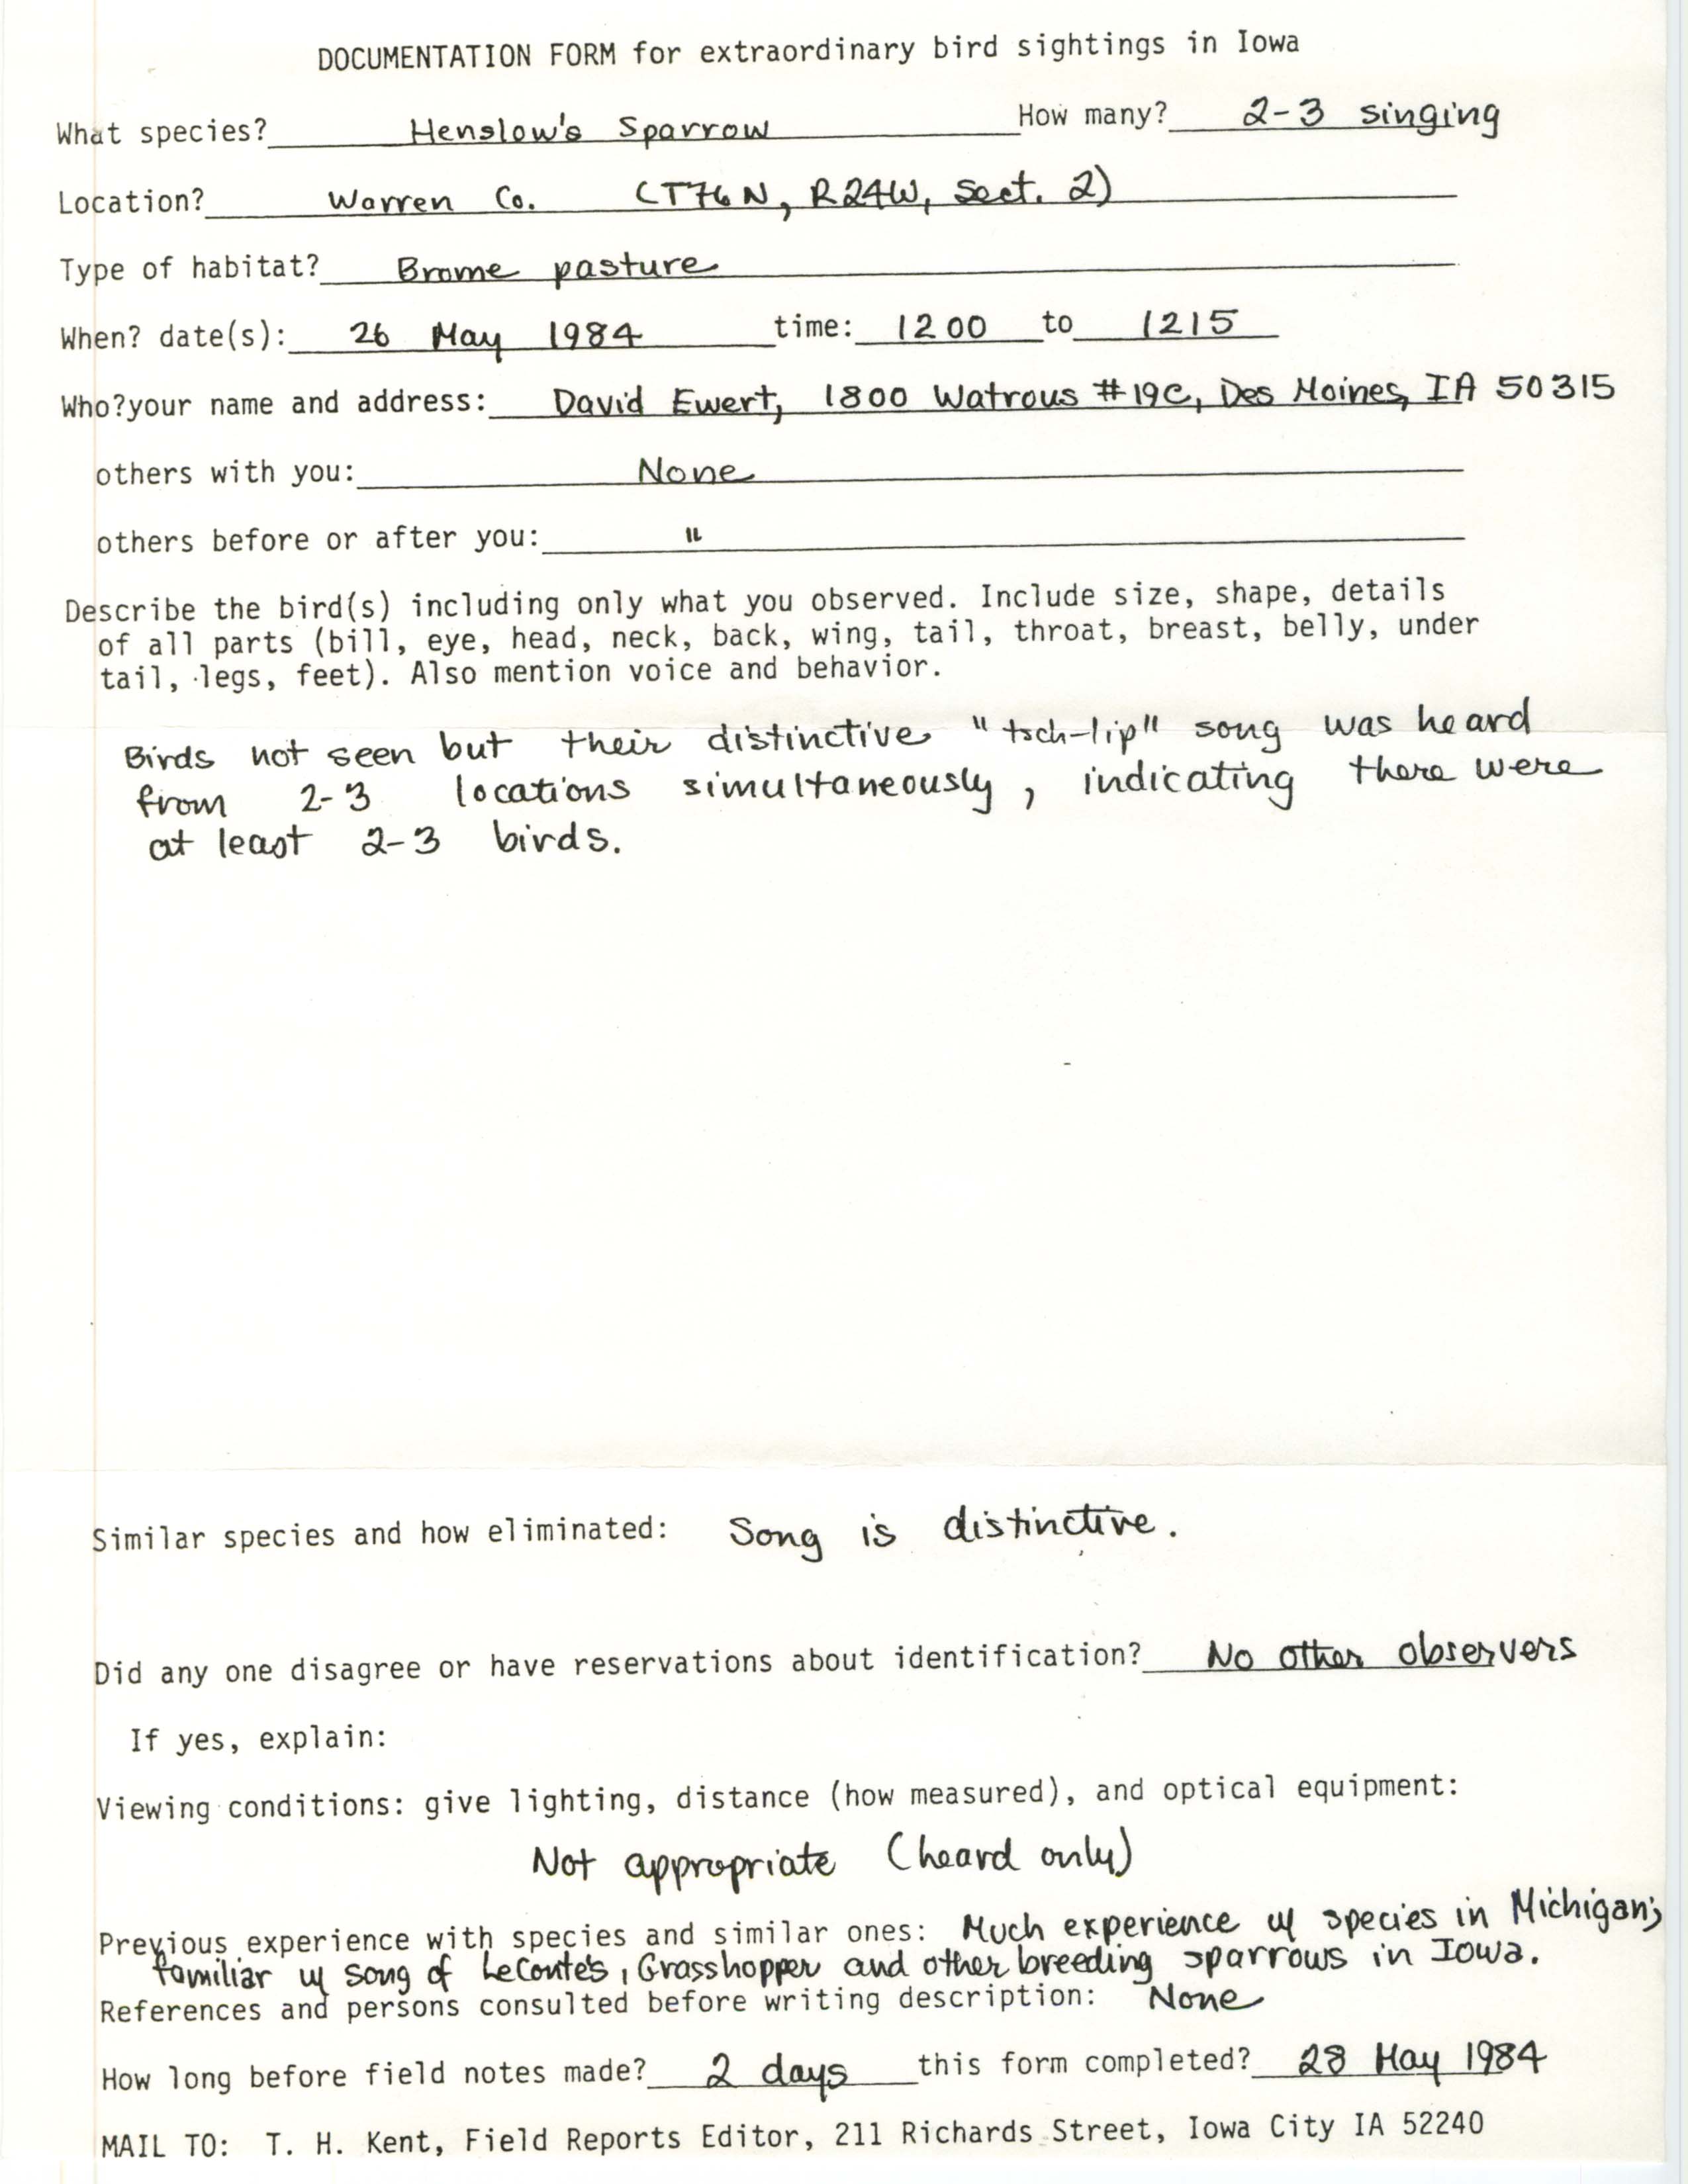 Rare bird documentation form for Henslow's Sparrow at Lincoln Township in Warren County in 1984